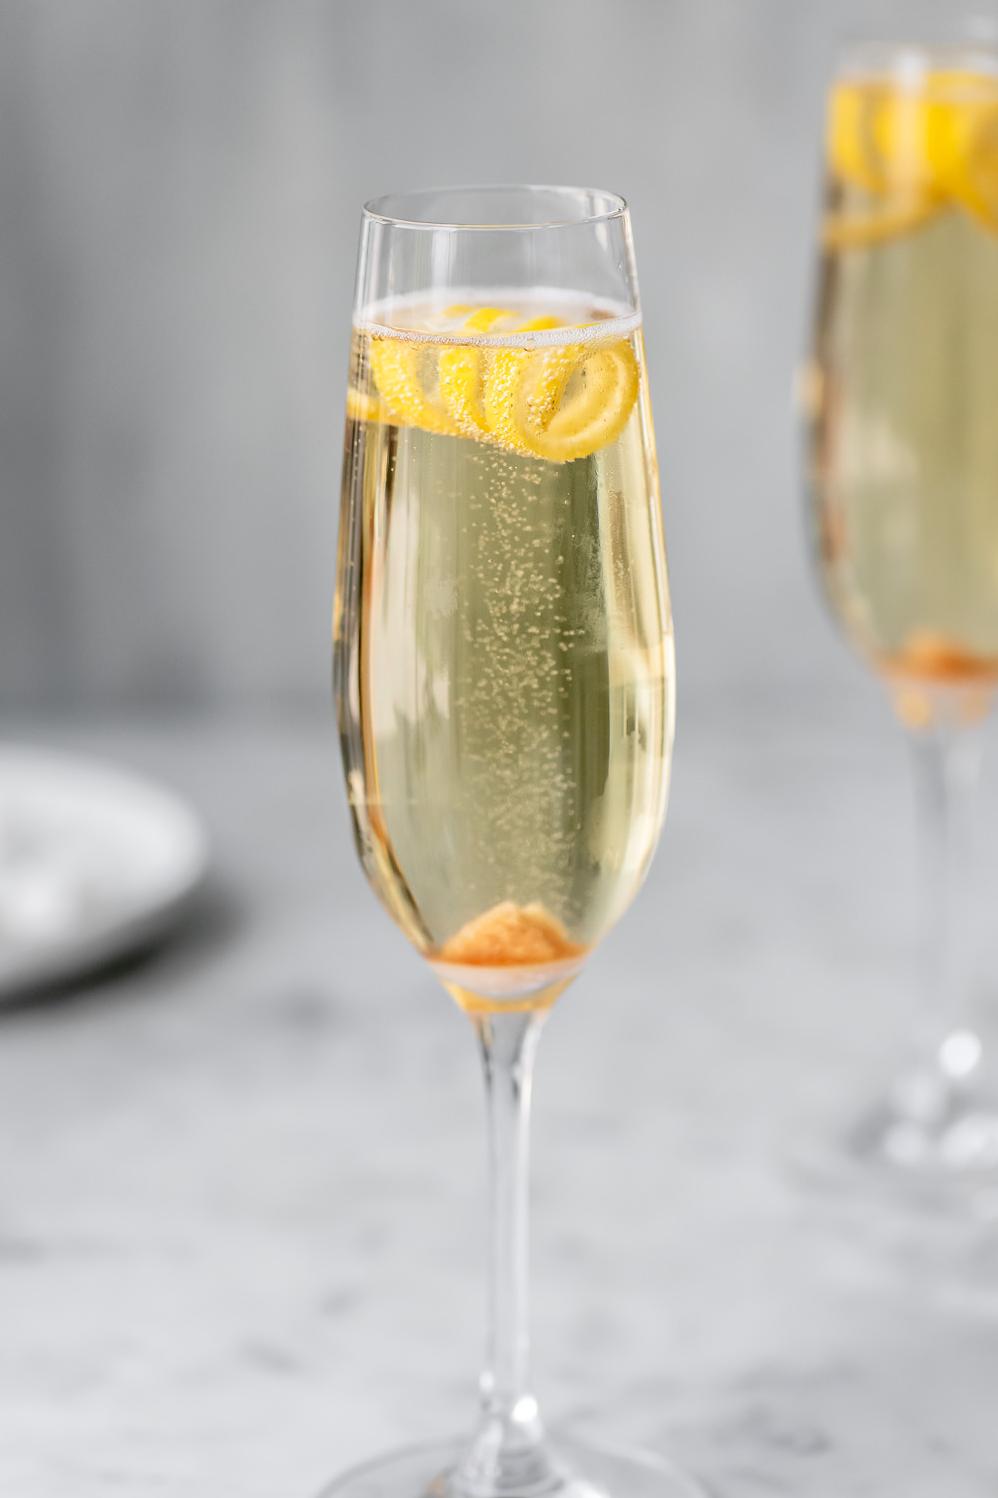  A classic twist on the ever-fizzy champagne